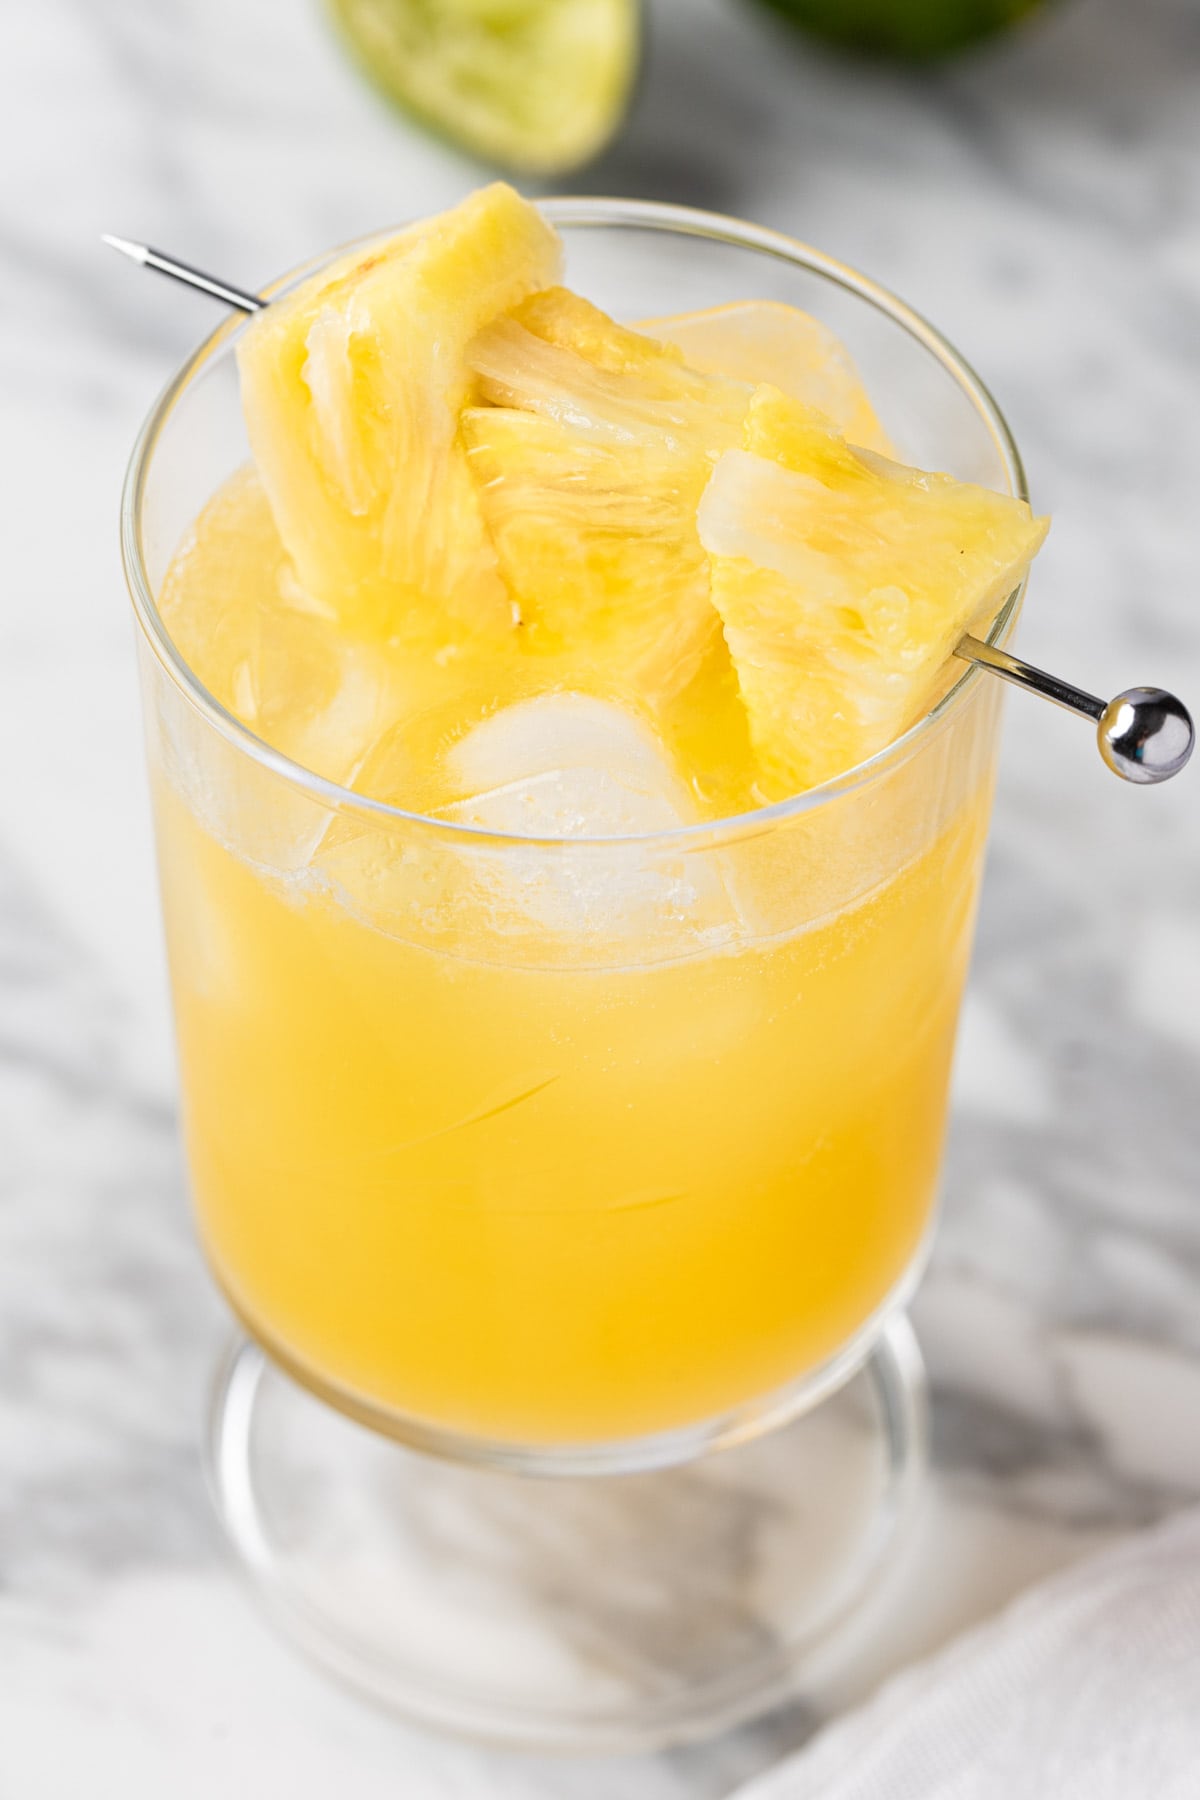 A pineapple gin cocktail garnished with pineapple slices.